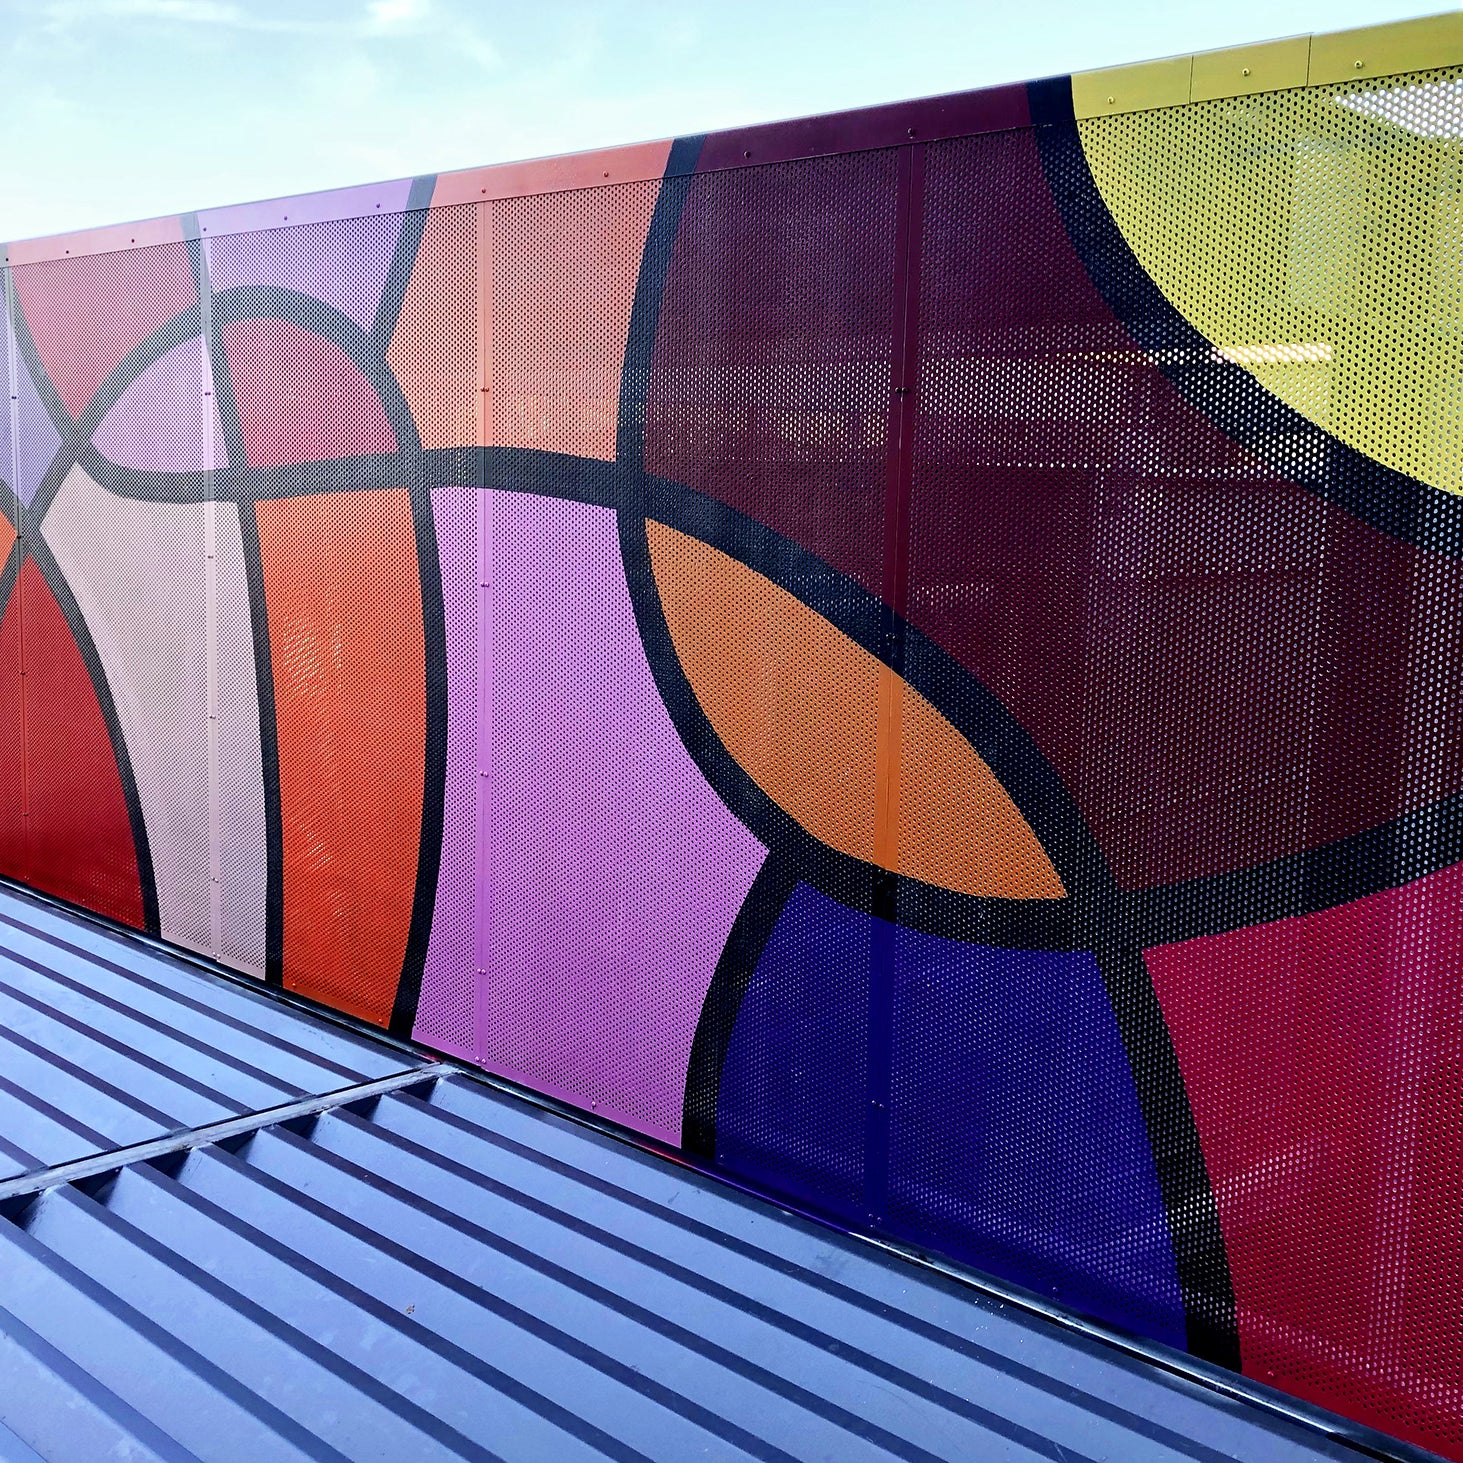 Artistic rooftop installation of an abstract mural with intertwined shapes in dynamic colors, adding a playful touch to the urban skyline.